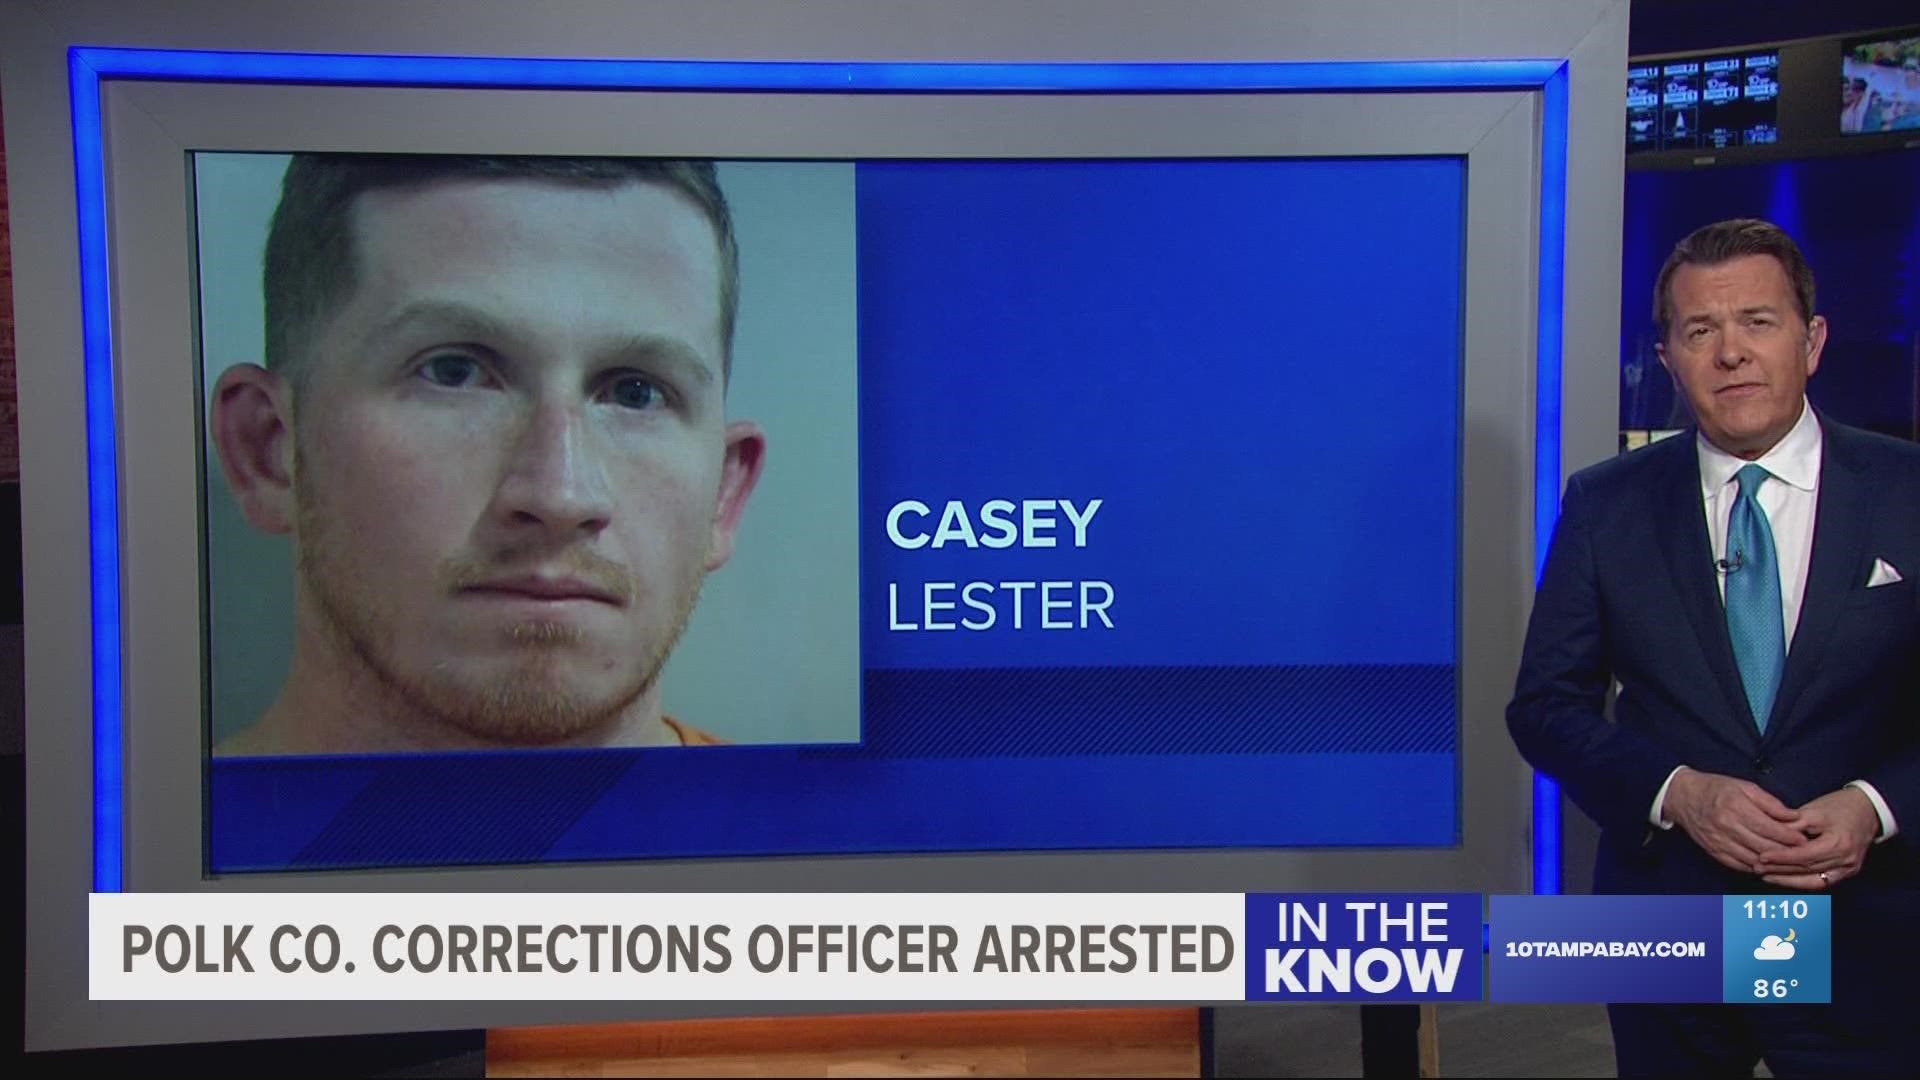 "...Mr. Lester should know better," the sheriff said.